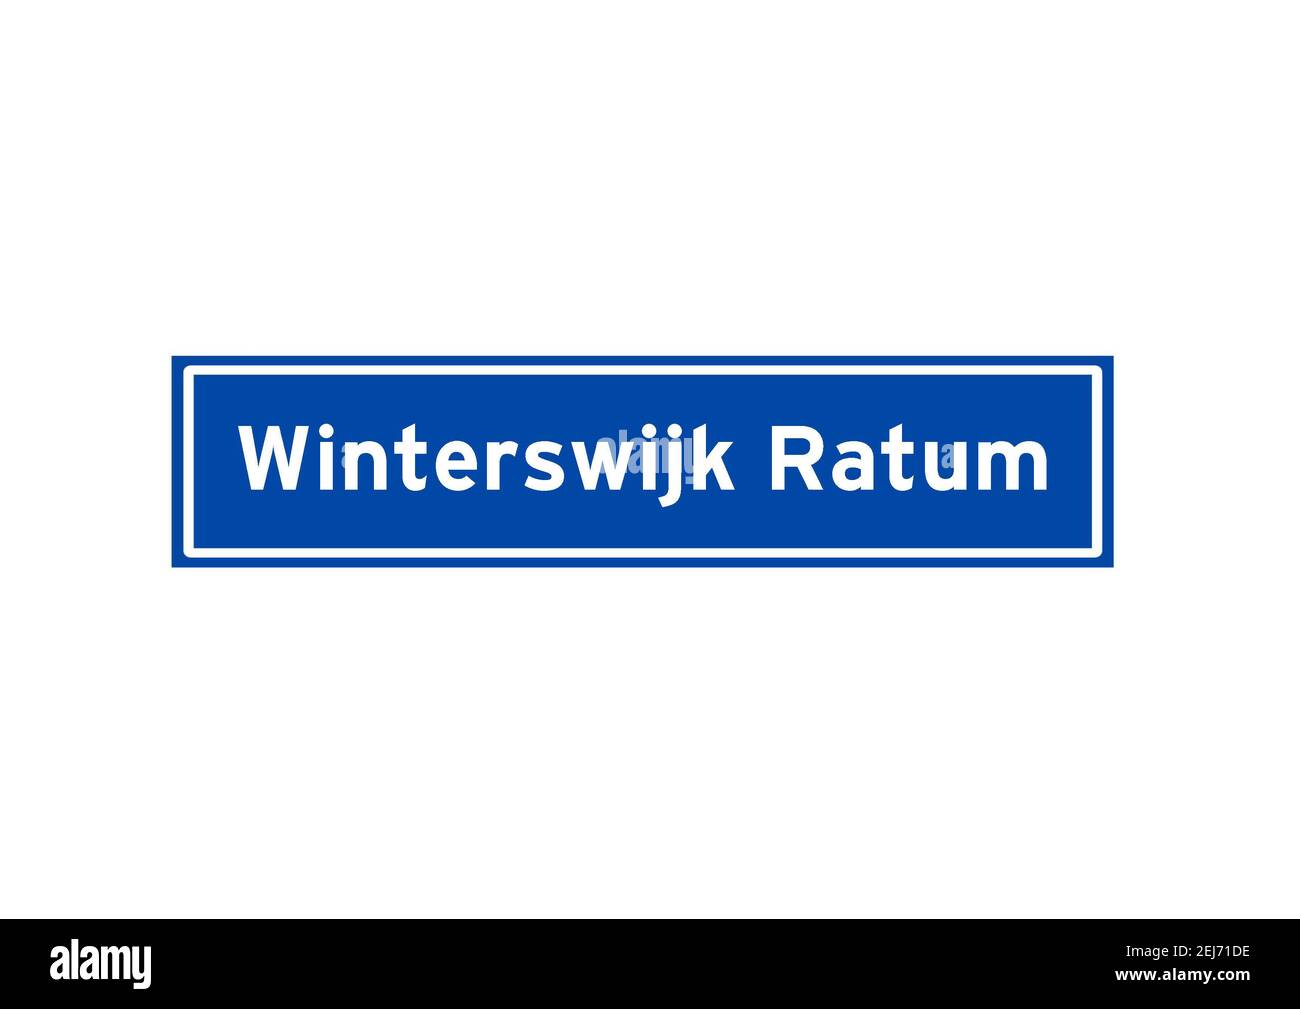 Winterswijk Ratum isolated Dutch place name sign. City sign from the Netherlands. Stock Photo